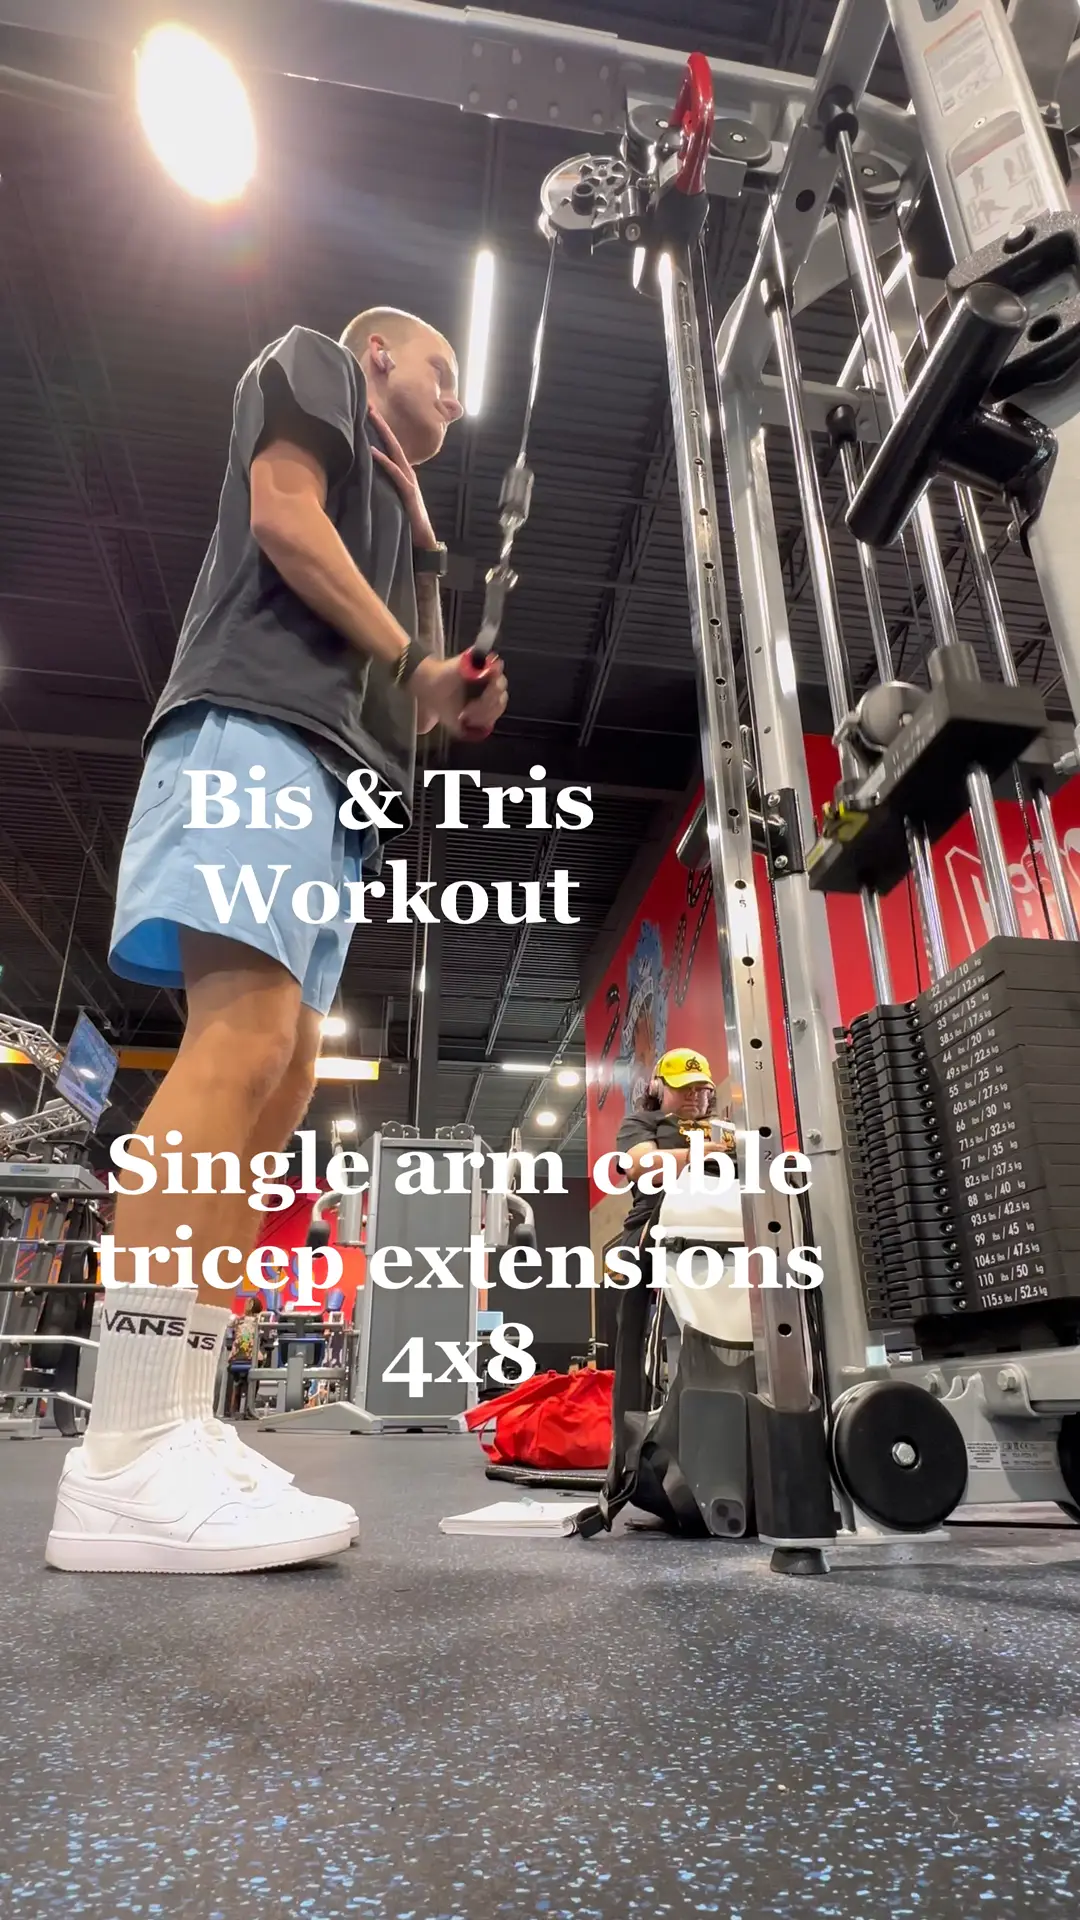 BICEP & TRICEP WORKOUT!!!, Video published by Liam Spencer